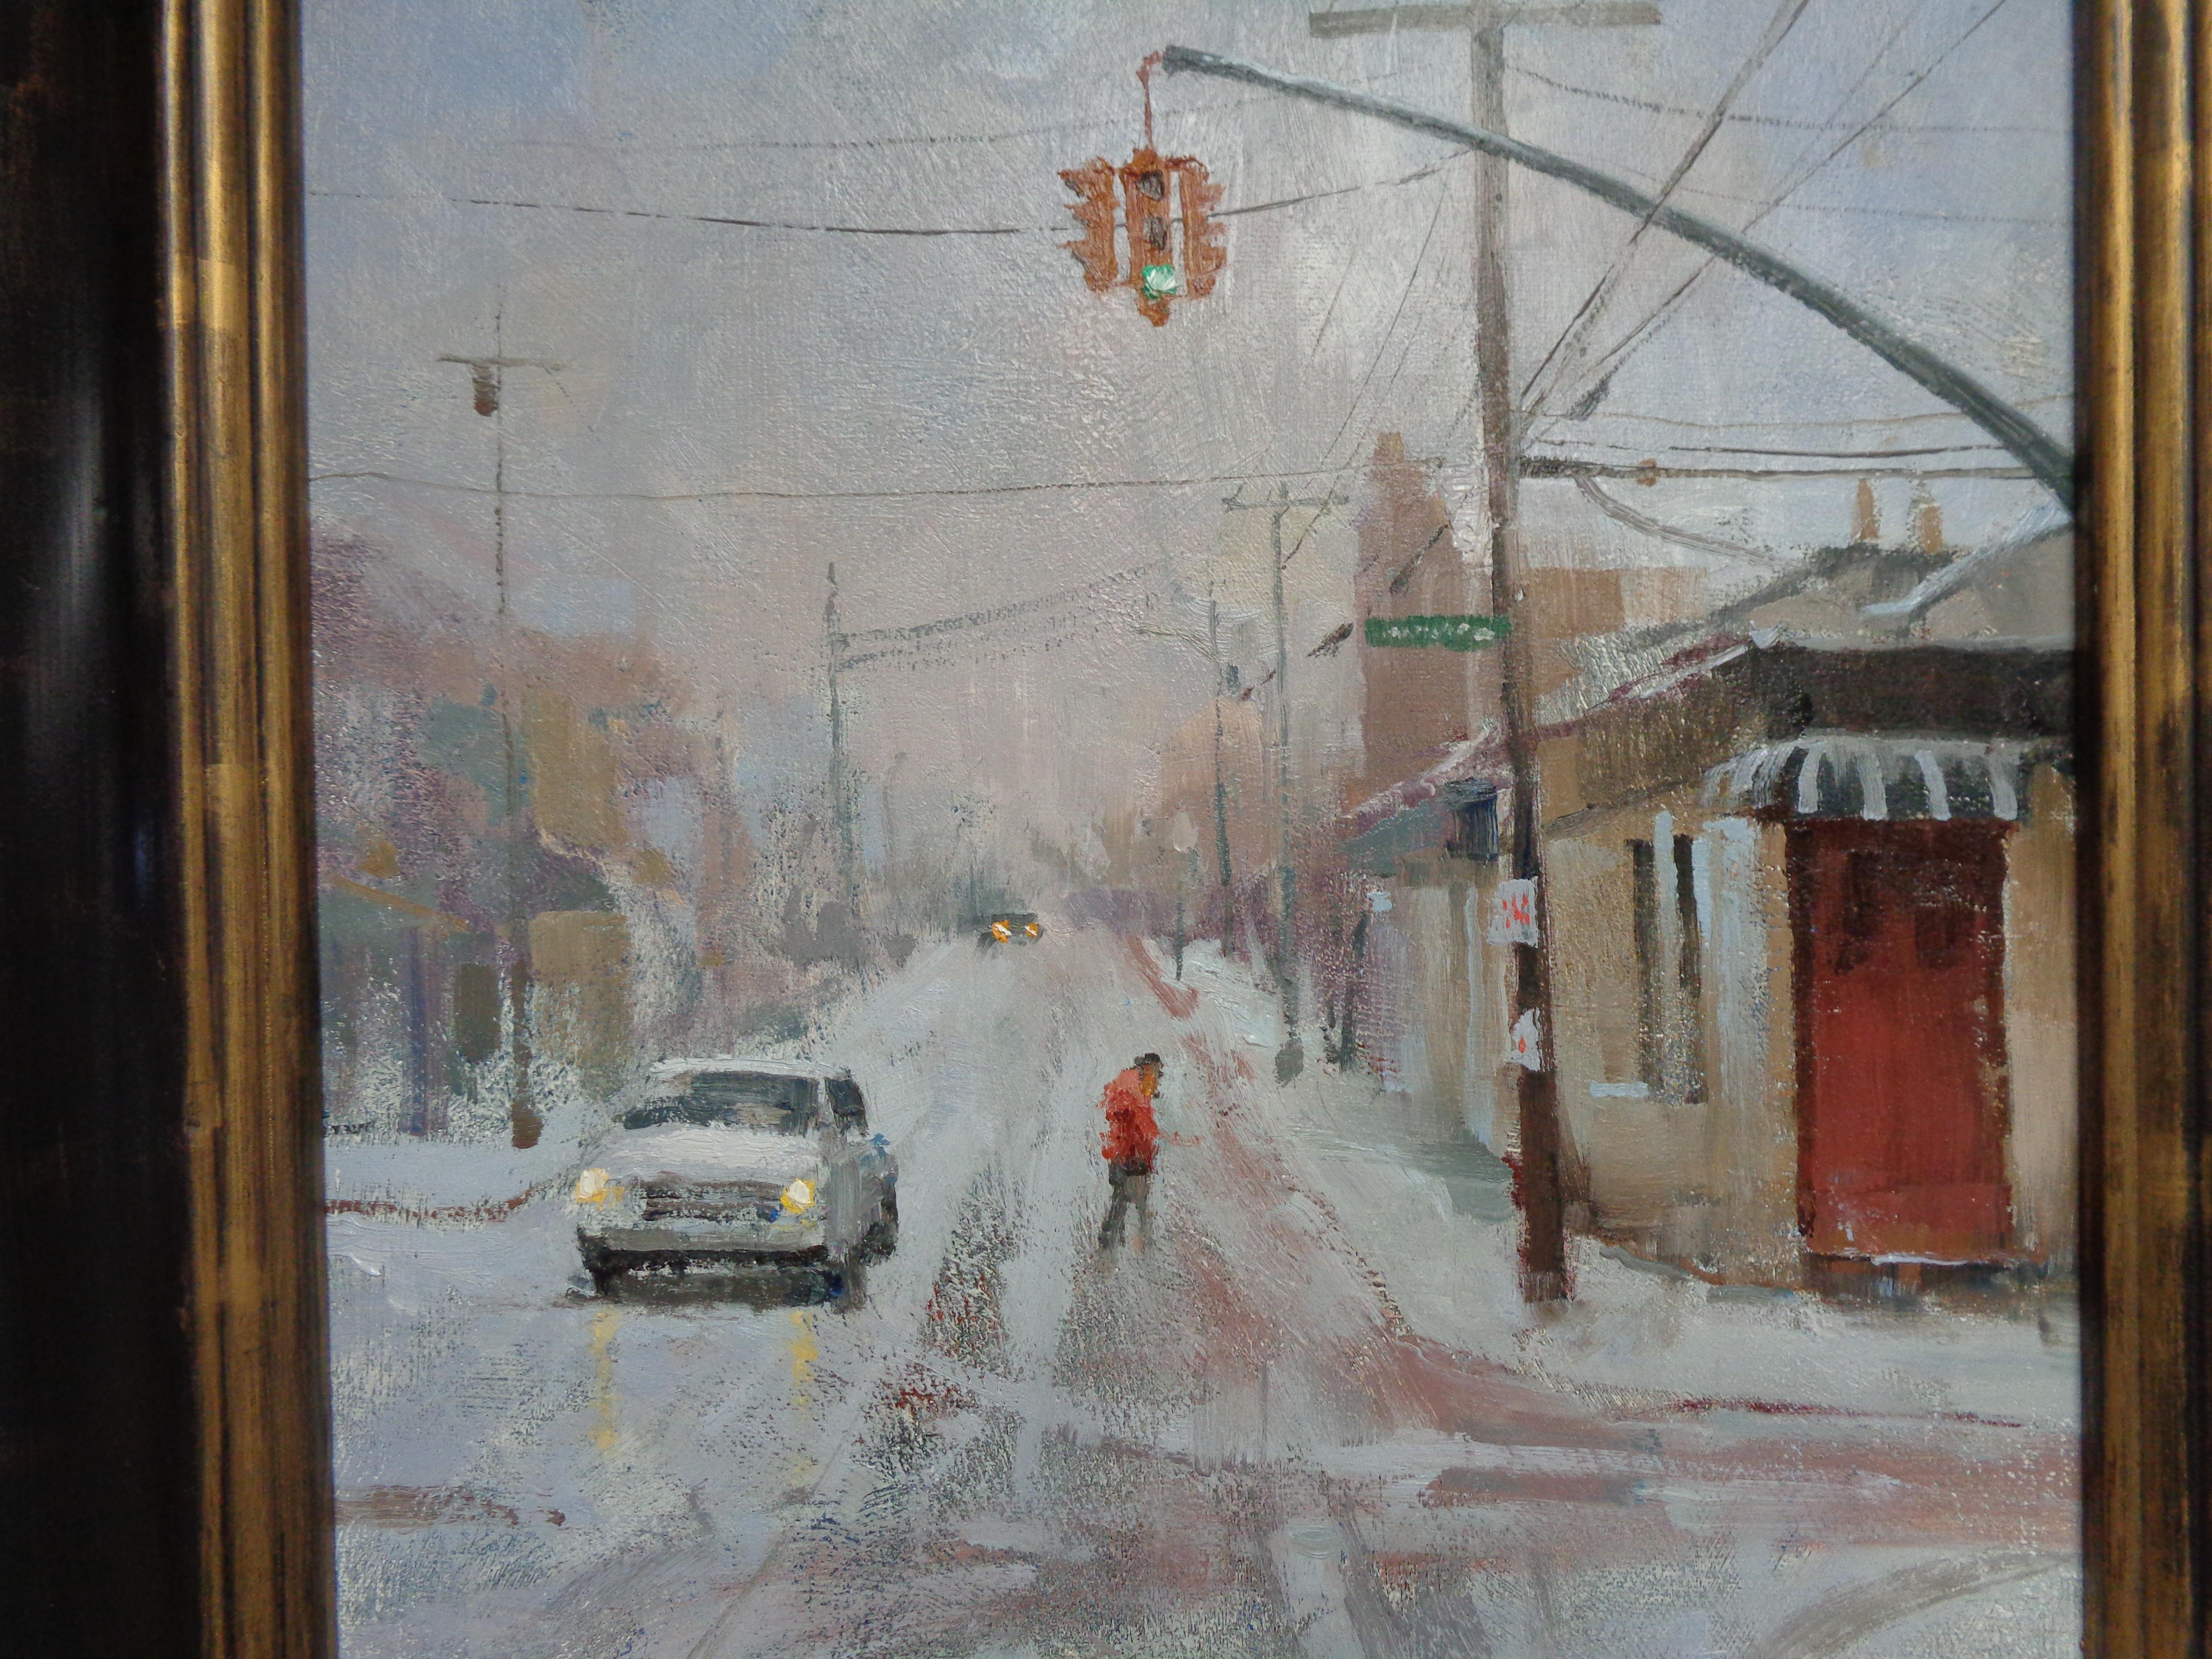  A beautiful winter street scene by contemporary artist Paul Bachem.
oil on canvas on panel
14 x 11 unframed
BIOGRAPHY
Paul Bachem studied with Harold R. Stevenson and Alma Gallanos Stevenson and enjoyed a 30 year illustration career. He worked for